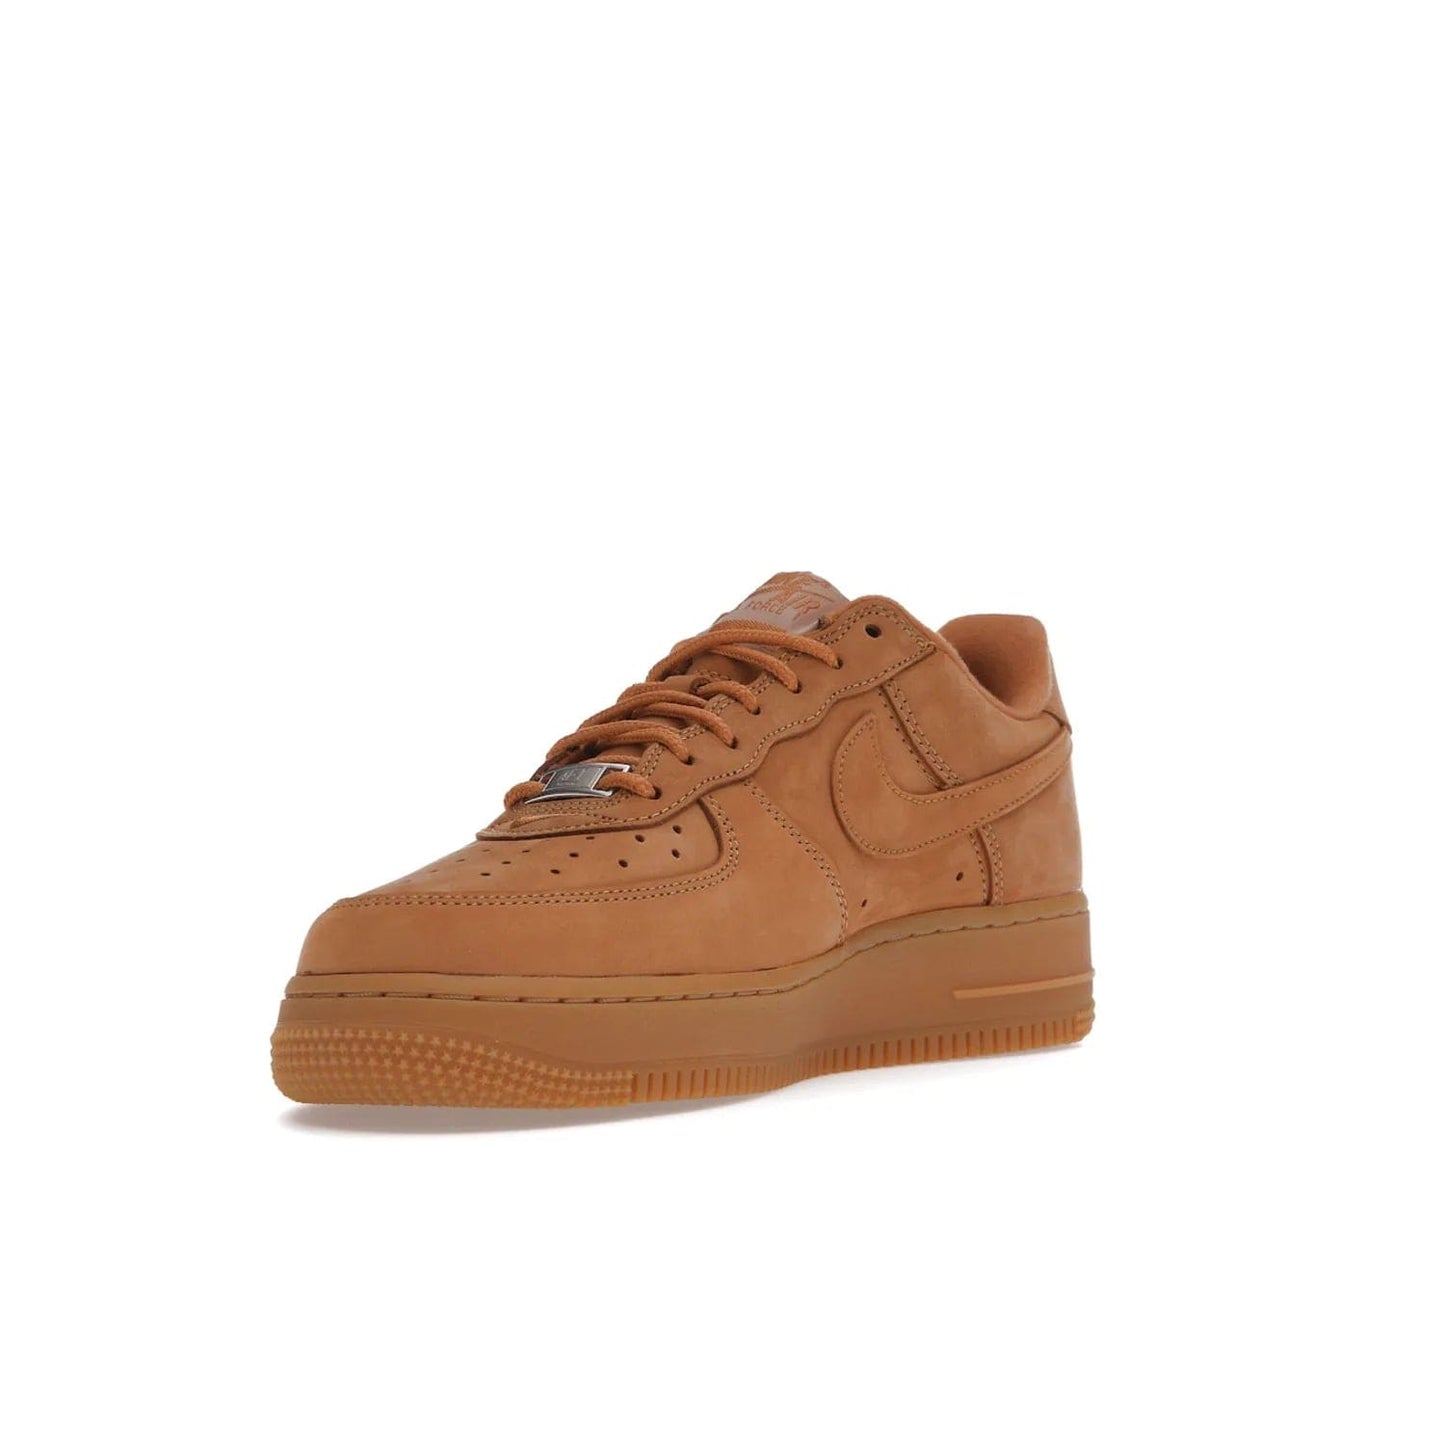 Nike Air Force 1 Low SP Supreme Wheat - Image 14 - Only at www.BallersClubKickz.com - A luxe Flax Durabuck upper and Supreme Box Logo insignias on the lateral heels make the Nike Air Force 1 Low SP Supreme Wheat a stylish lifestyle shoe. Matching Flax Air sole adds a classic touch to this collaboration between Nike and Supreme. Make a statement with this edition of the classic Air Force 1 Low.